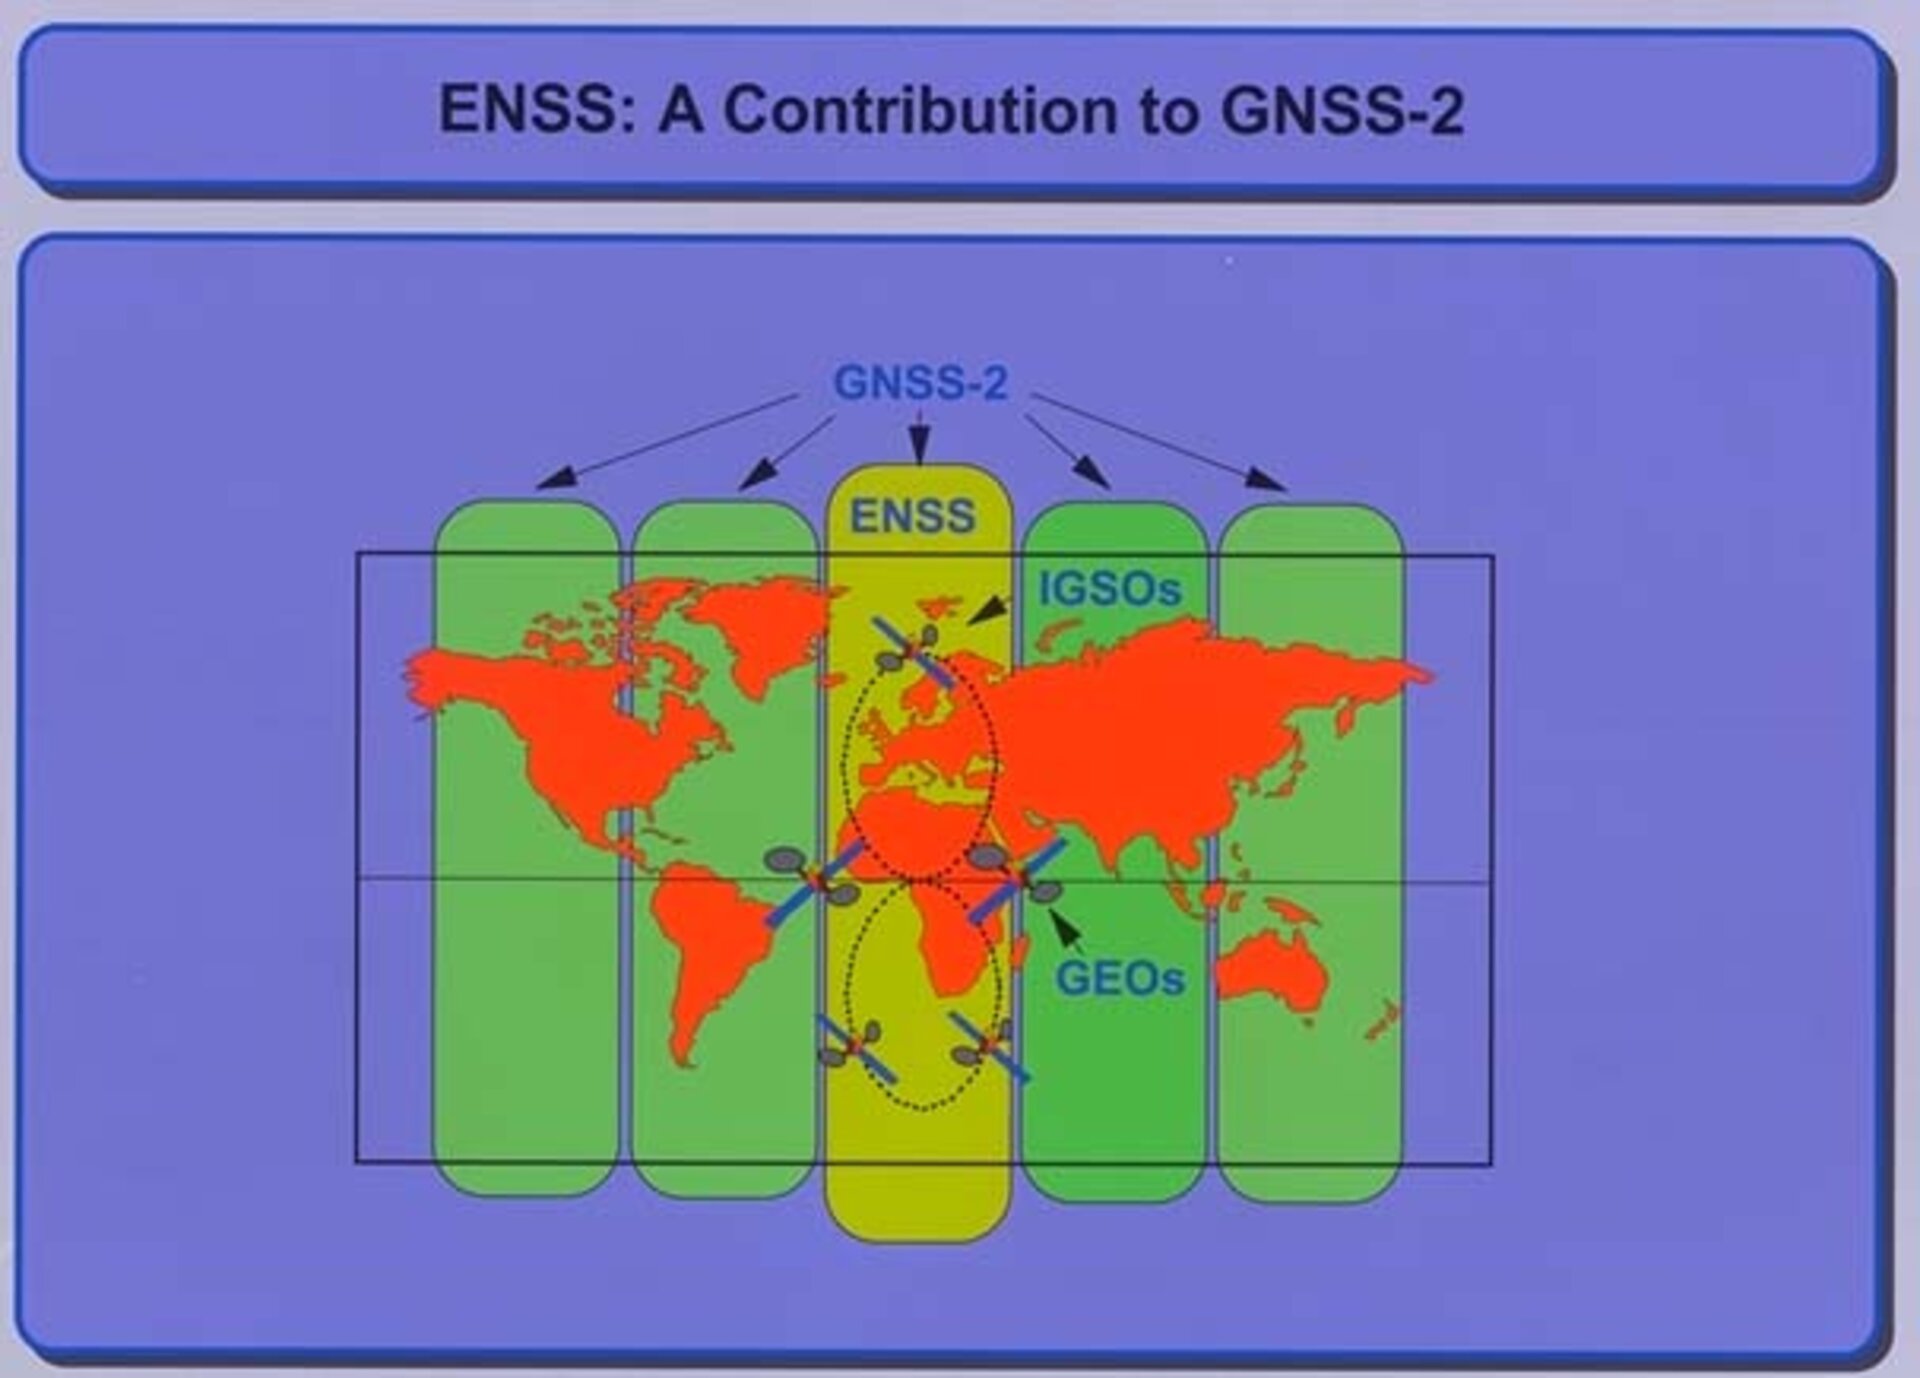 ENSS: a contribution to GNSS-2